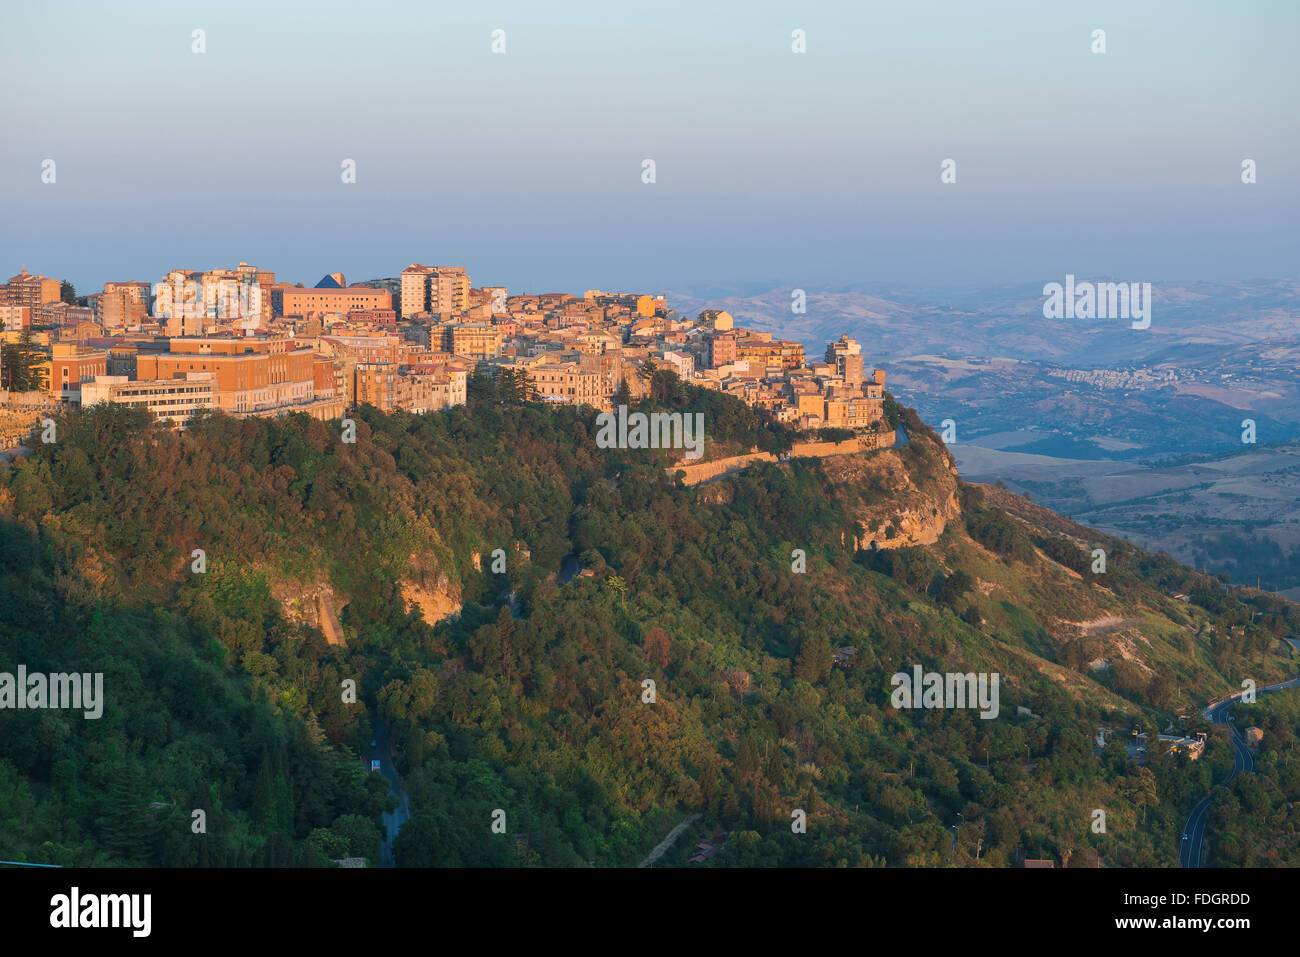 Sicily landscape, view of sunrise on the historic city of Enna - a large hill town sited at the centre of the island of Sicily. Stock Photo